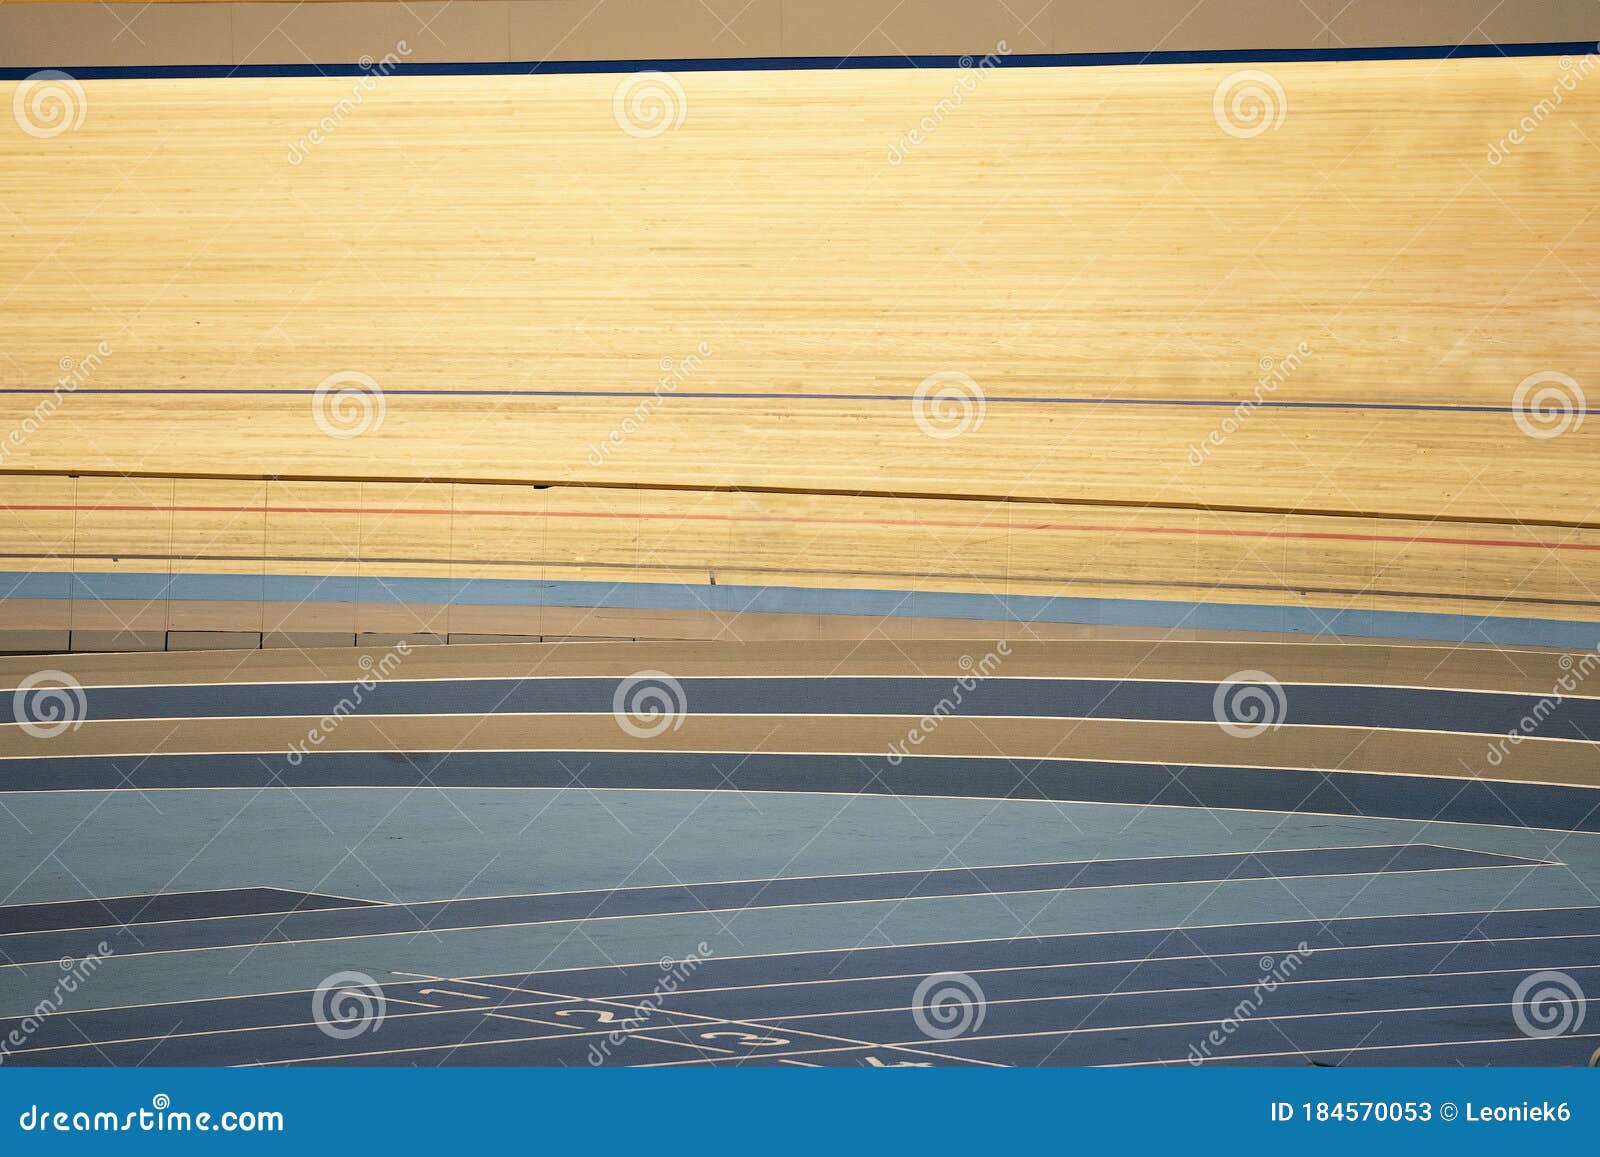 tracks of an indoor track cycling velodrome with wooden course race-track and a blue floor